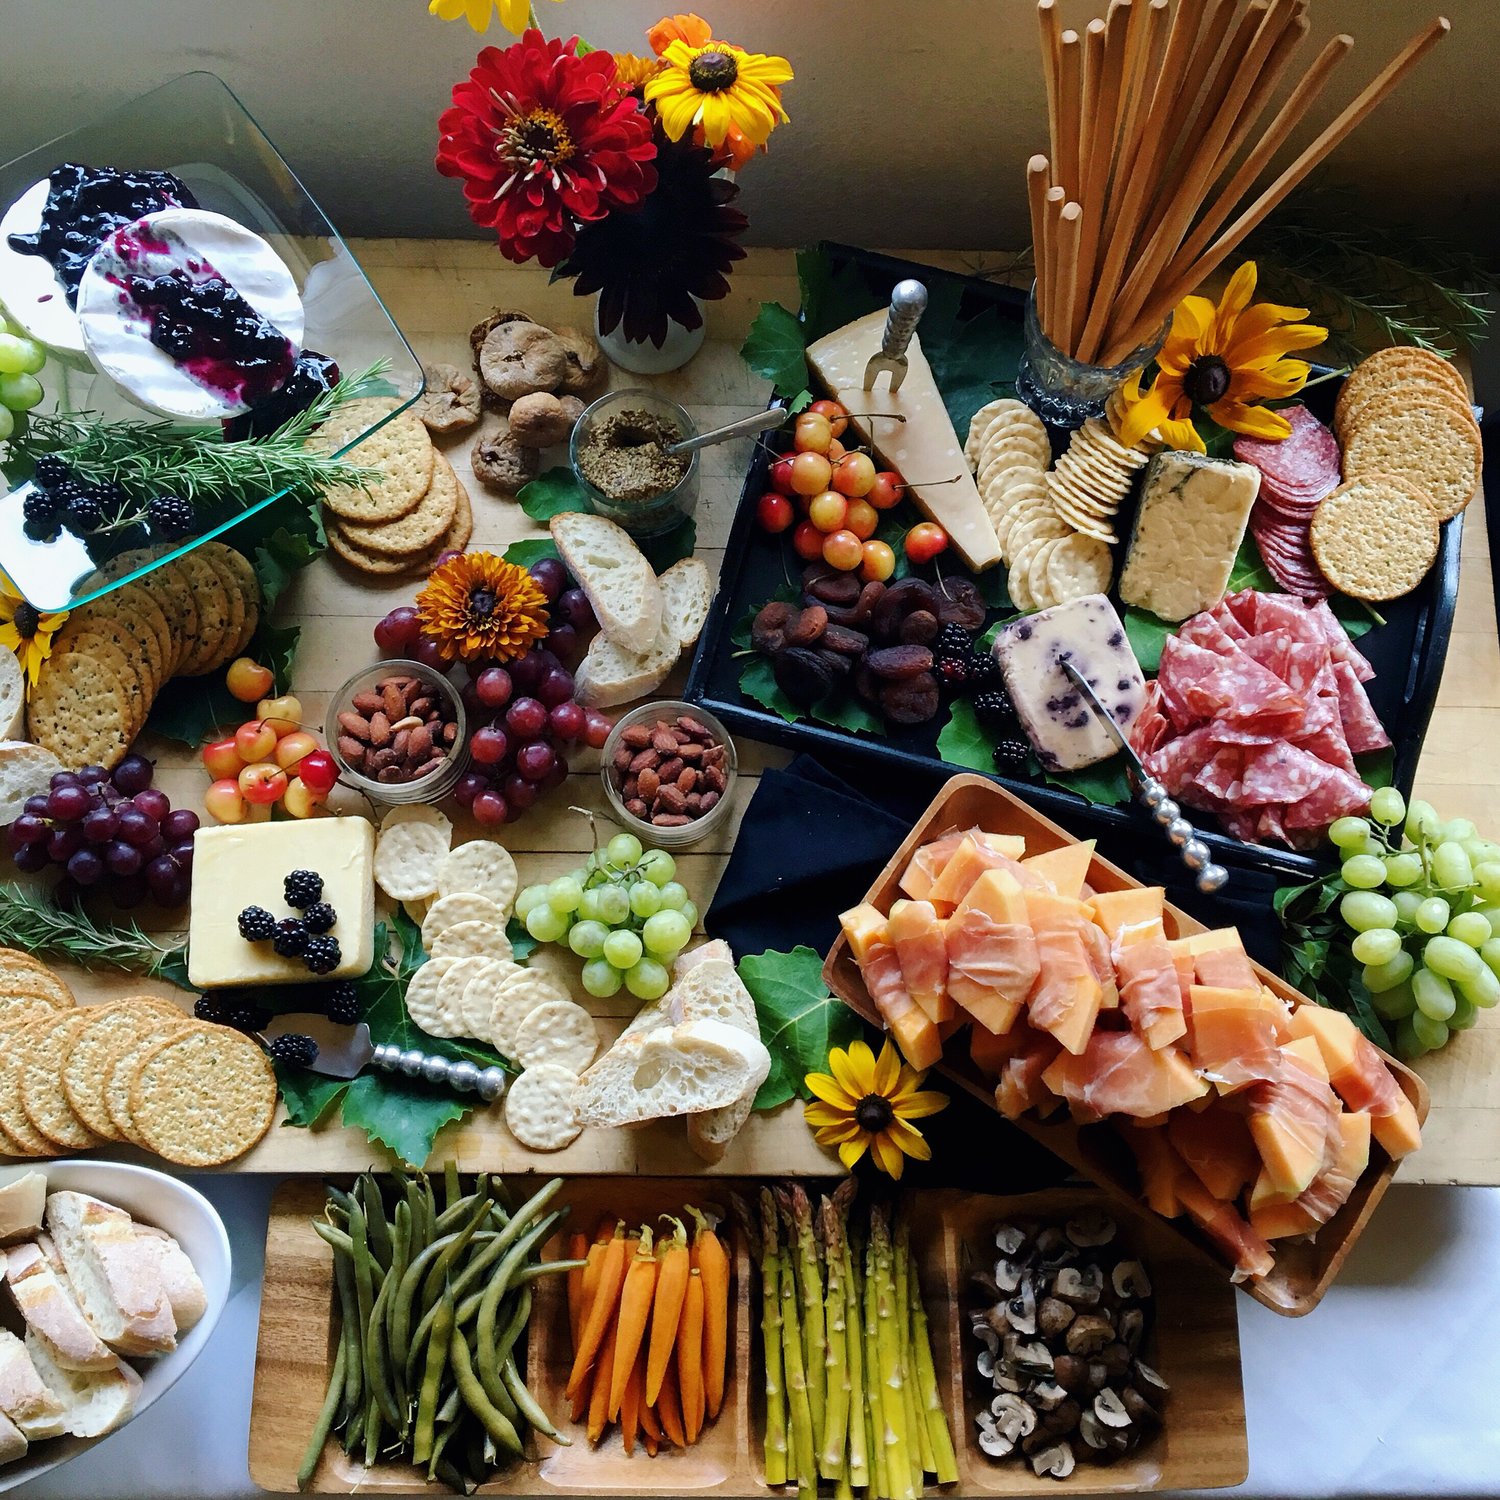 How to choose food for your wedding - Advice from a professional - Fiona's local with Jessica by Bessie Young Photography Wedding Catering Service in Sonora CA.JPG